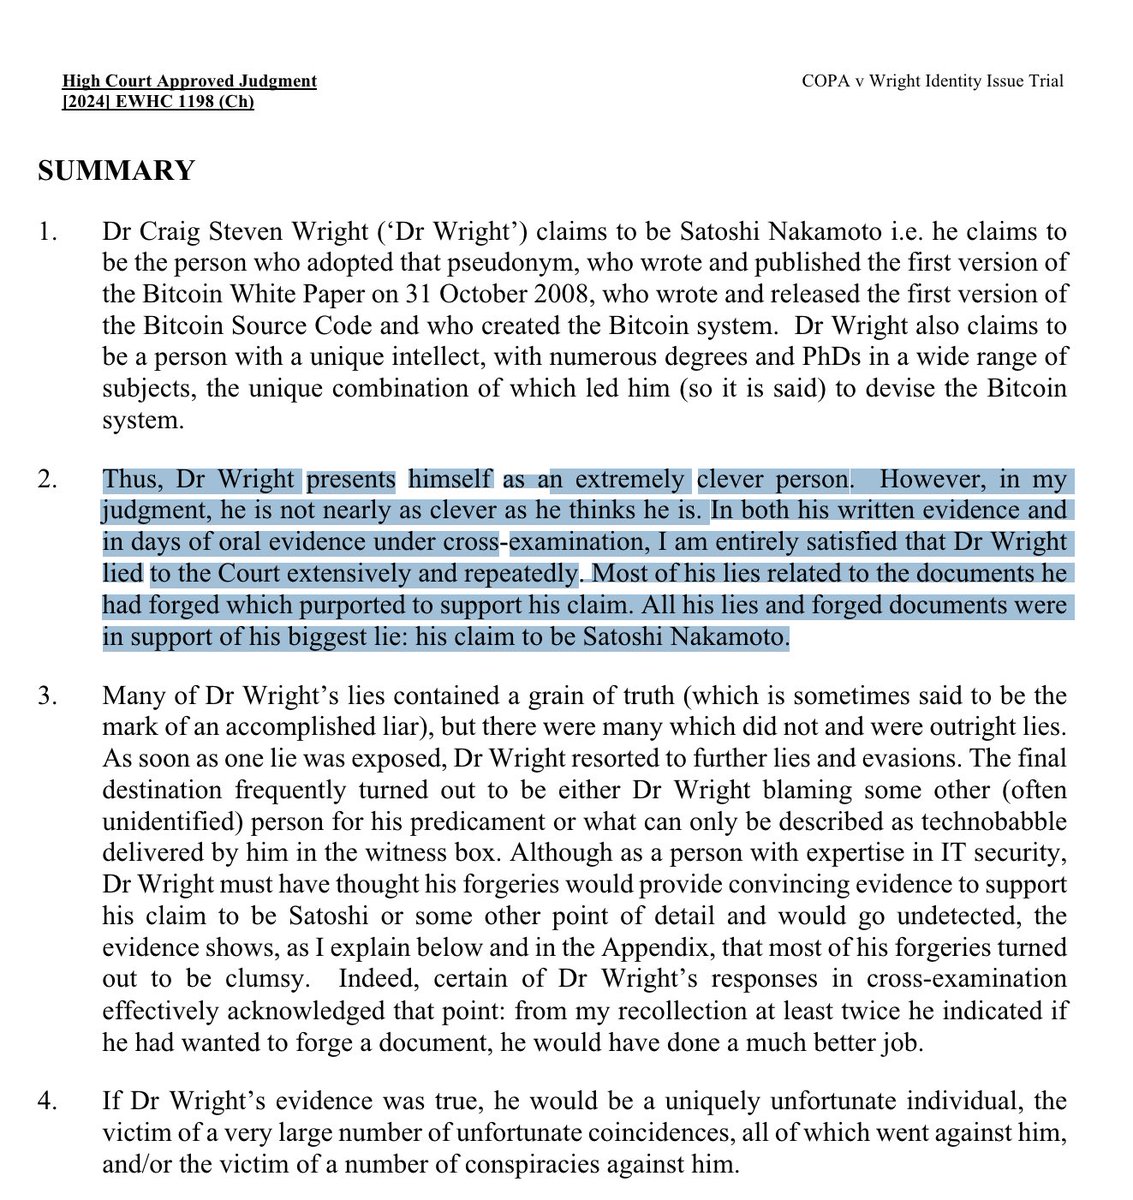 JUST IN 🔴

A Judge has just published his ruling in the COPA vs Craig Wright lawsuit that Craig is not Satoshi Nakamoto.

Thoughts?